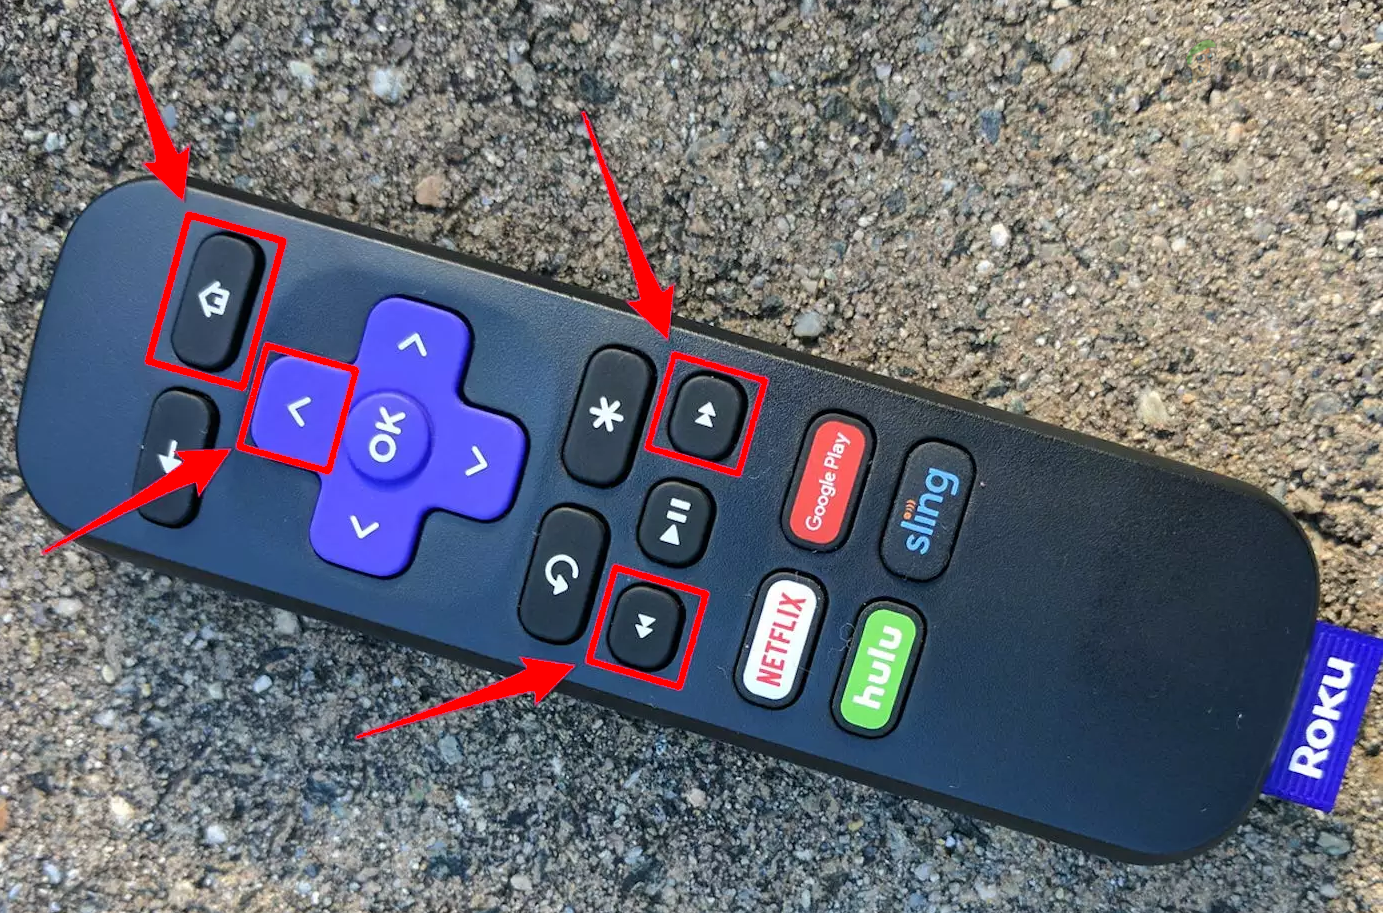 Reset the TCL TV Through its Remote